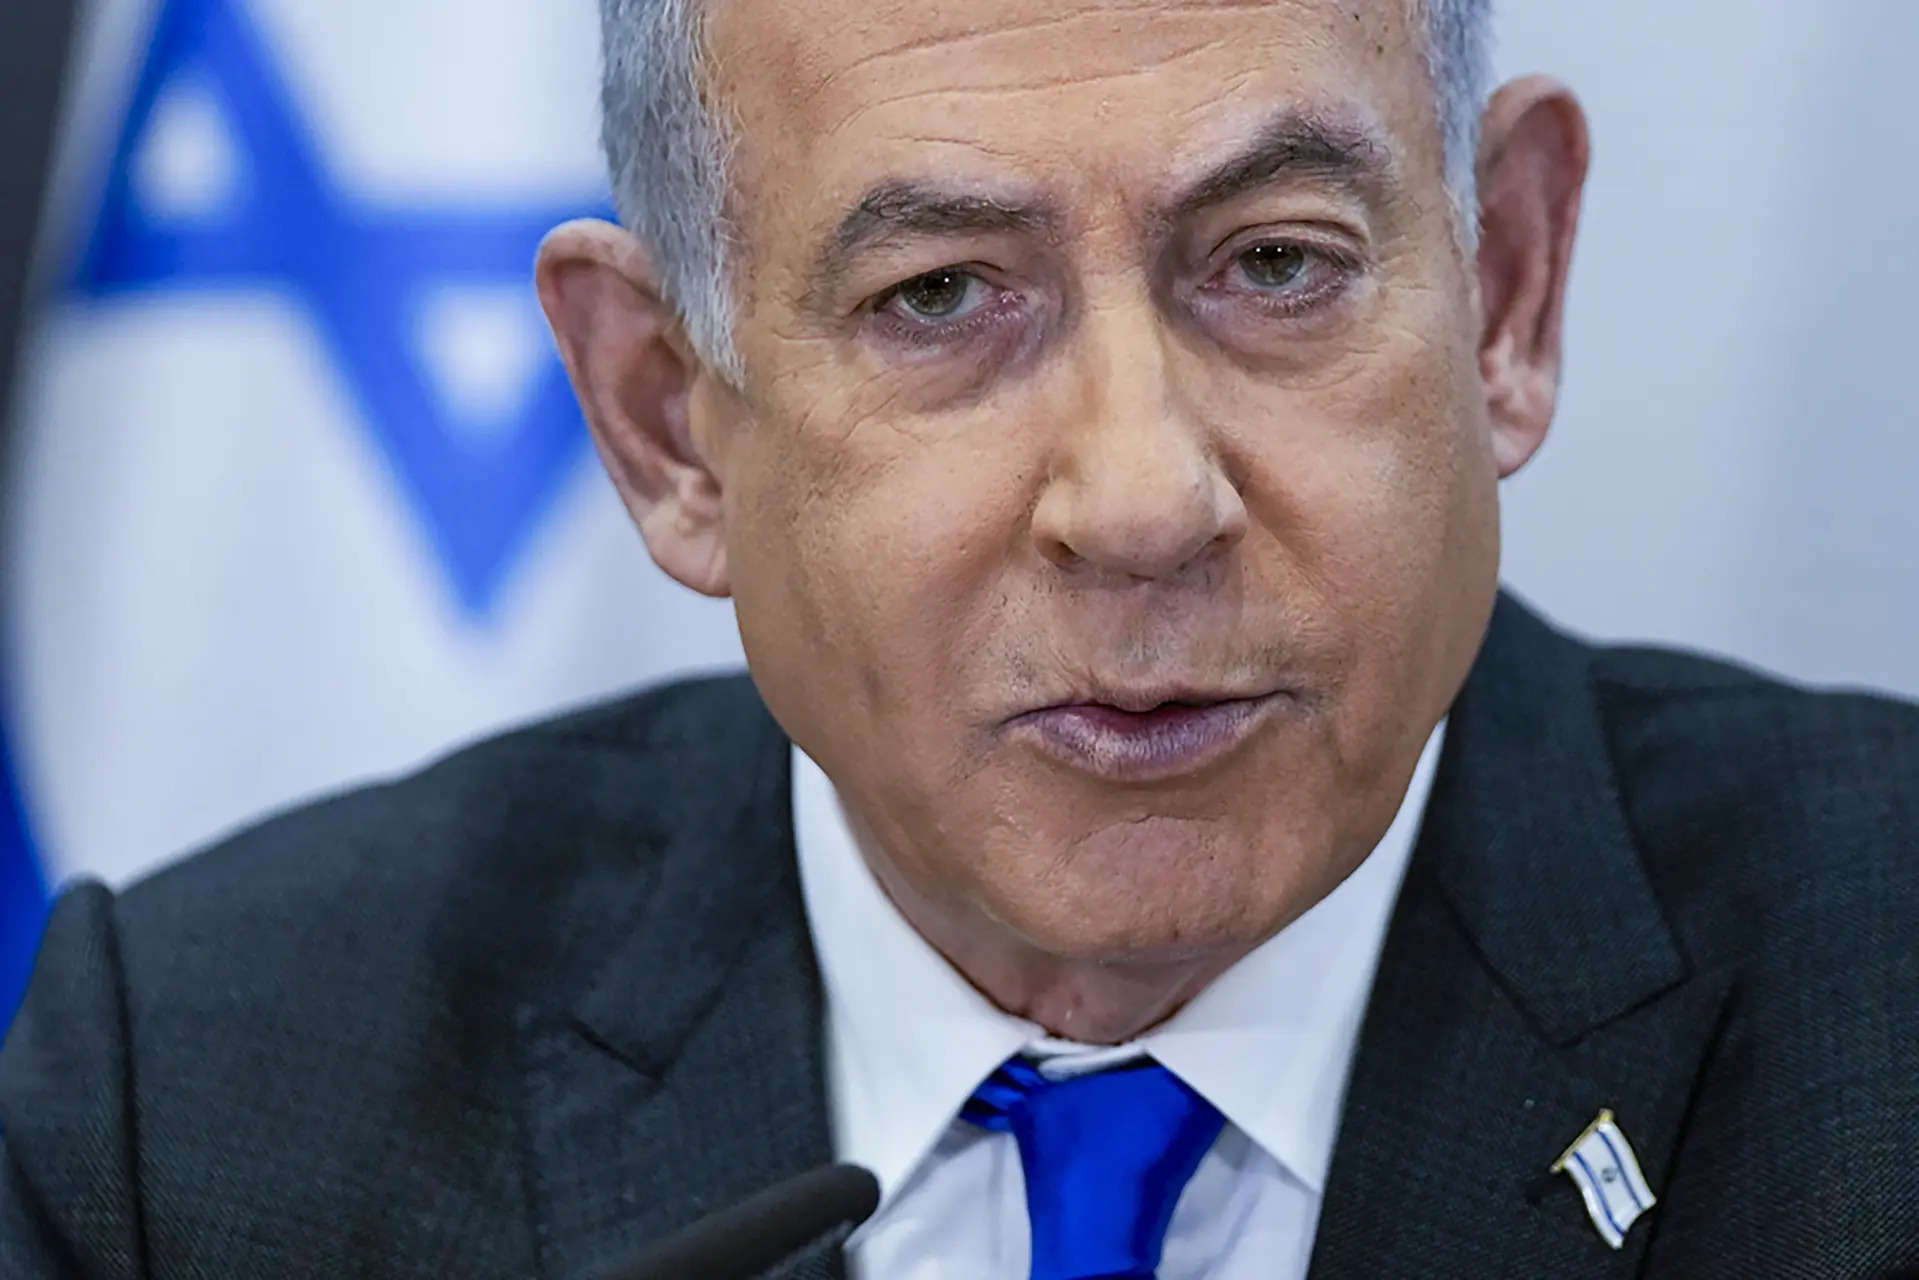 Israel PM Netanyahu equates pro-Palestine Protesters Group 'Gays For Gaza' to 'chickens for KFC' 